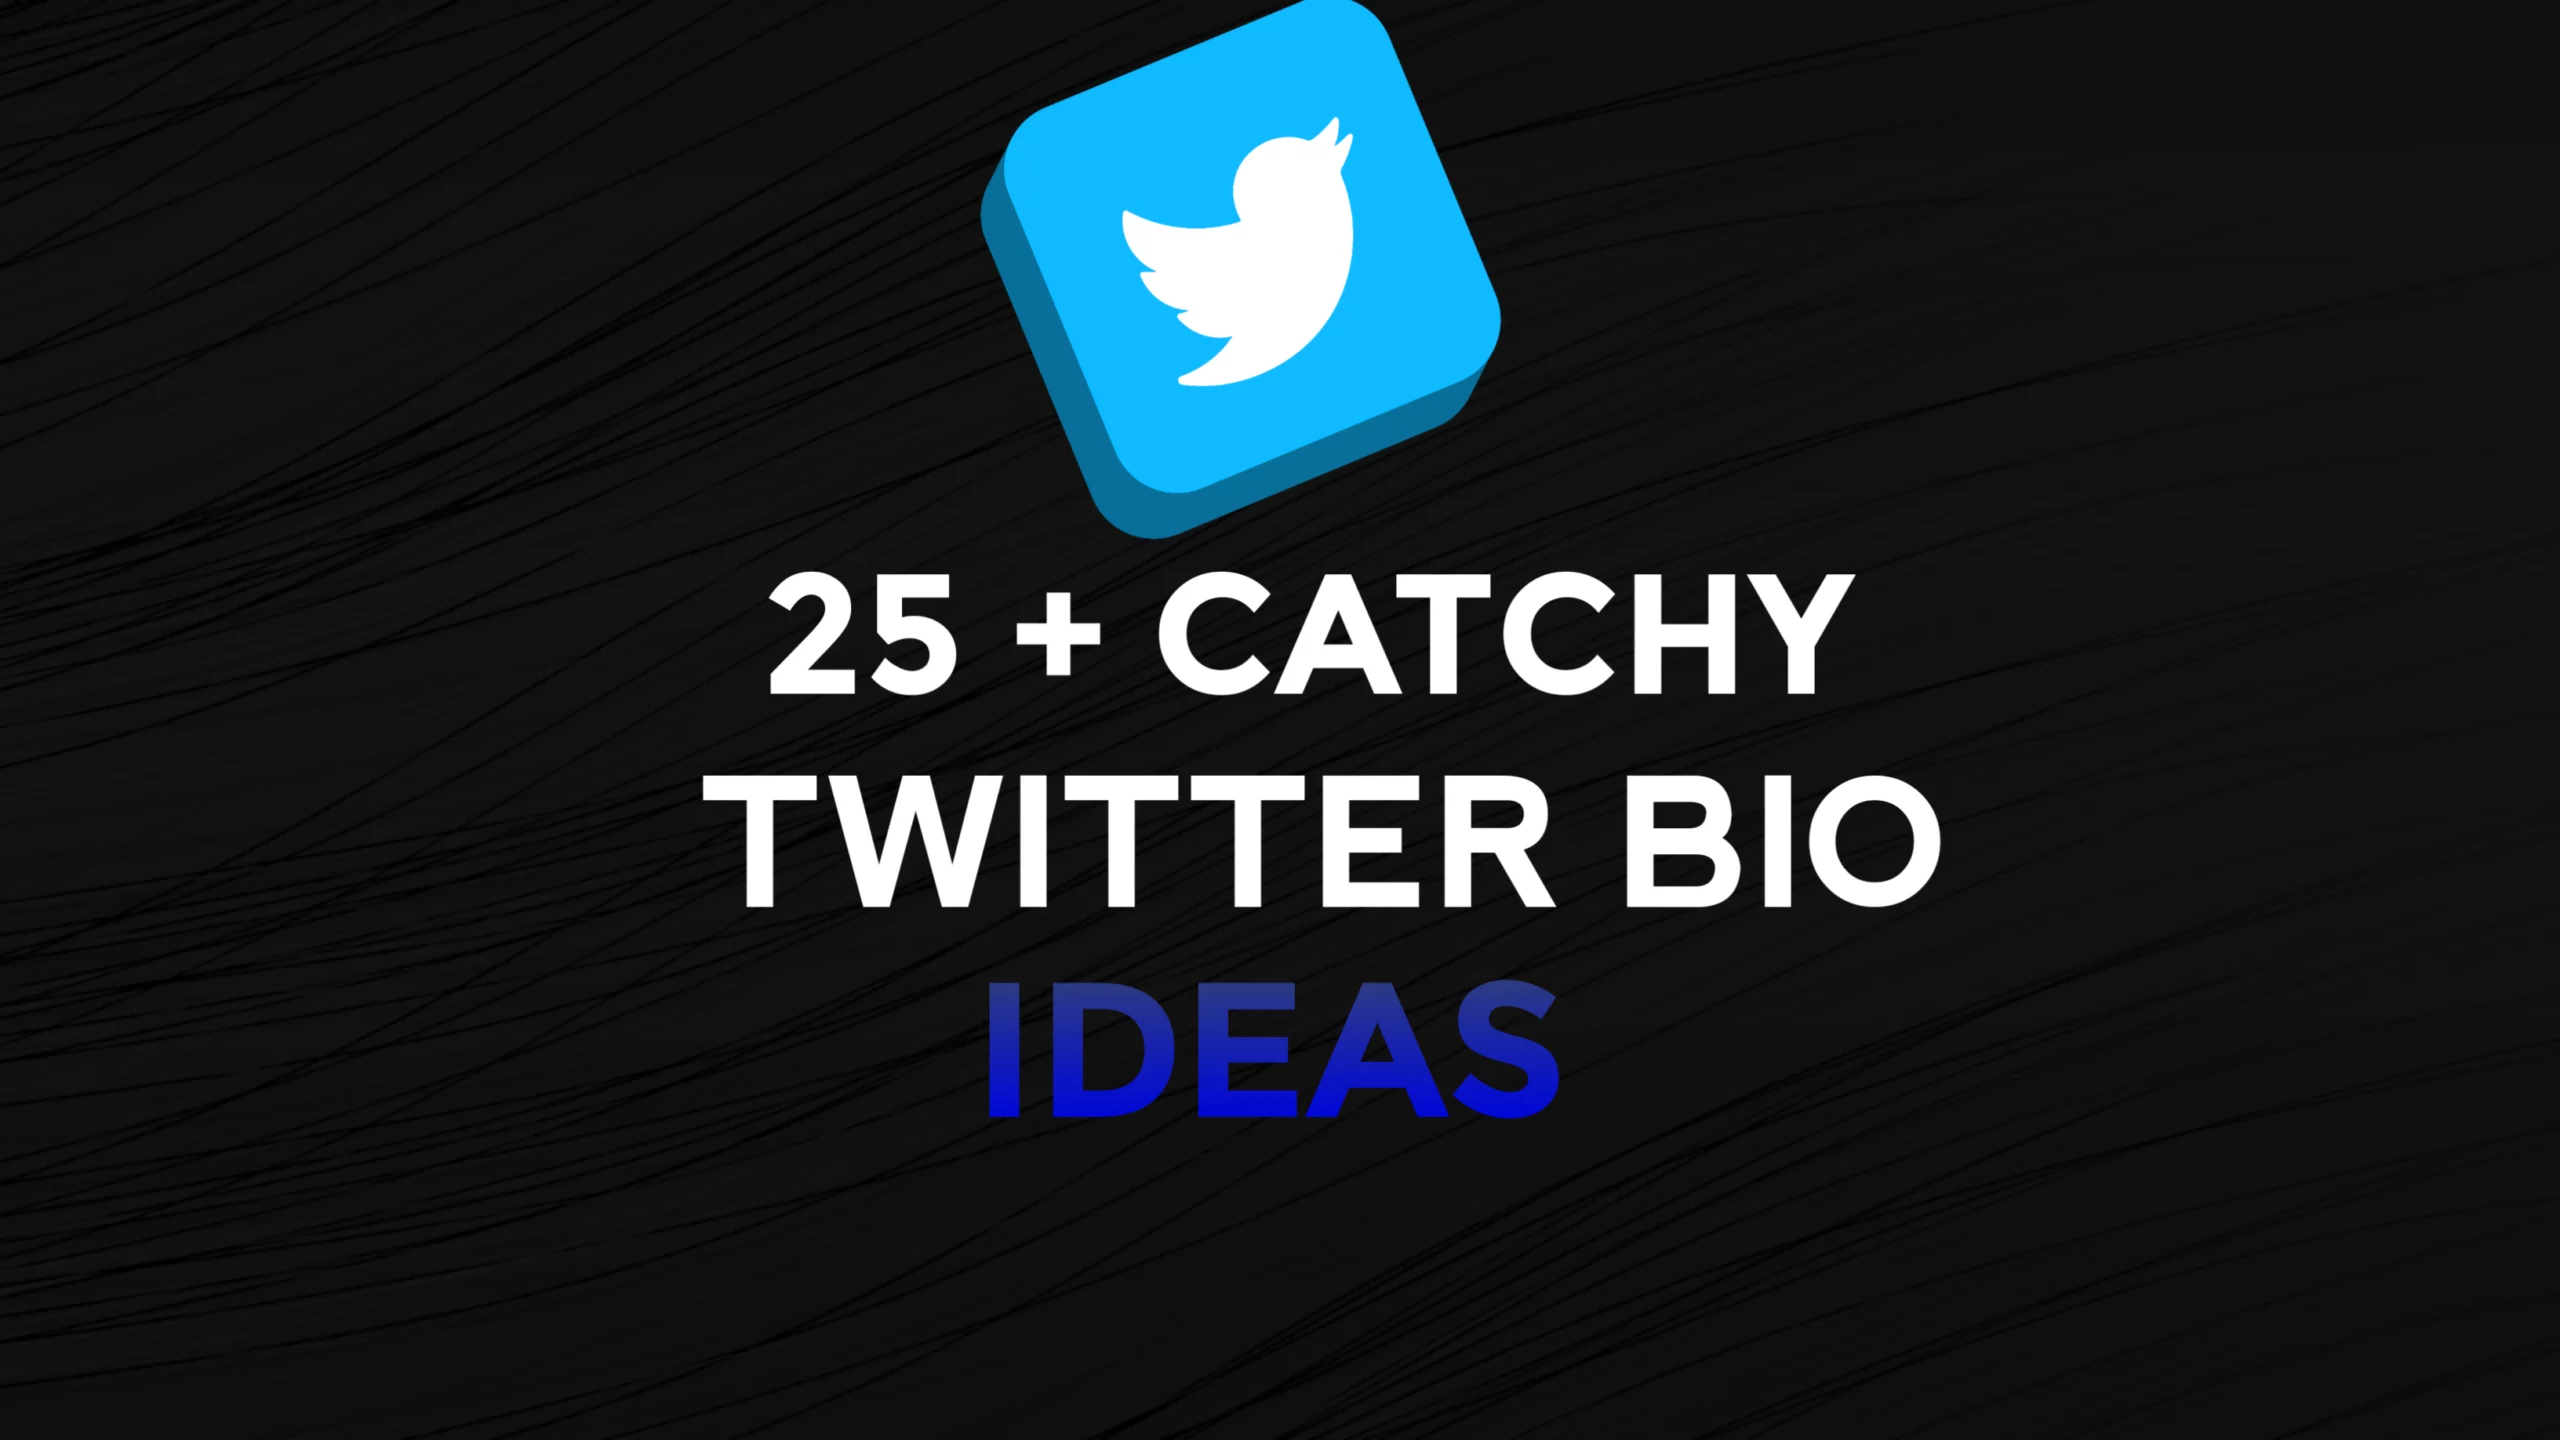 25+ Catchy Twitter Bio Ideas To Turn Visitors Into Followers